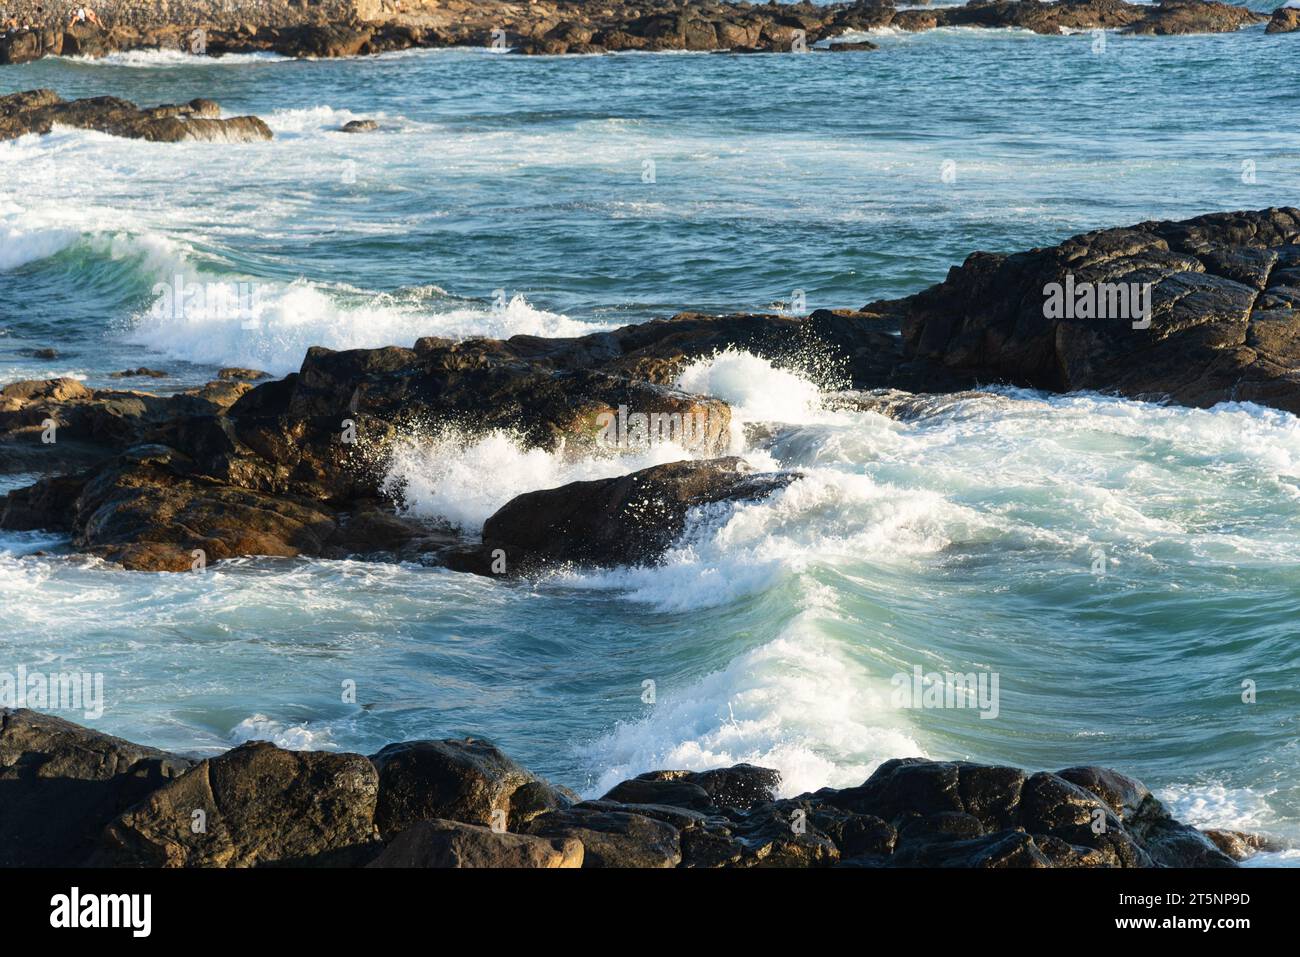 Sea waves lapping gently on the dark rocks of the beach. Preserved and alive nature. Stock Photo